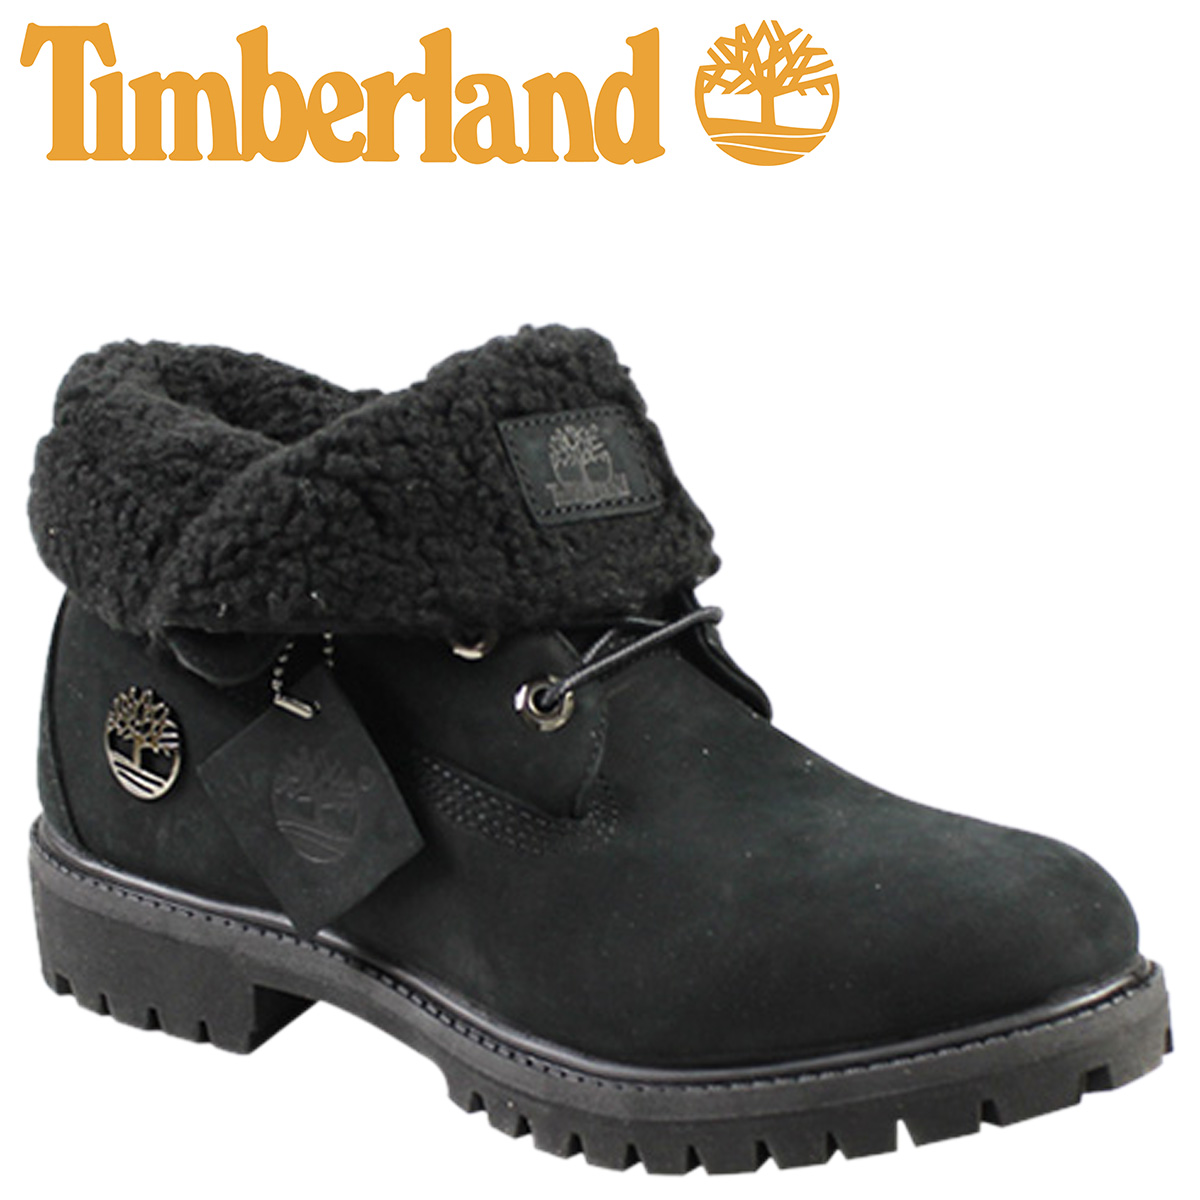 timberland fur boots, OFF 72%,Buy!